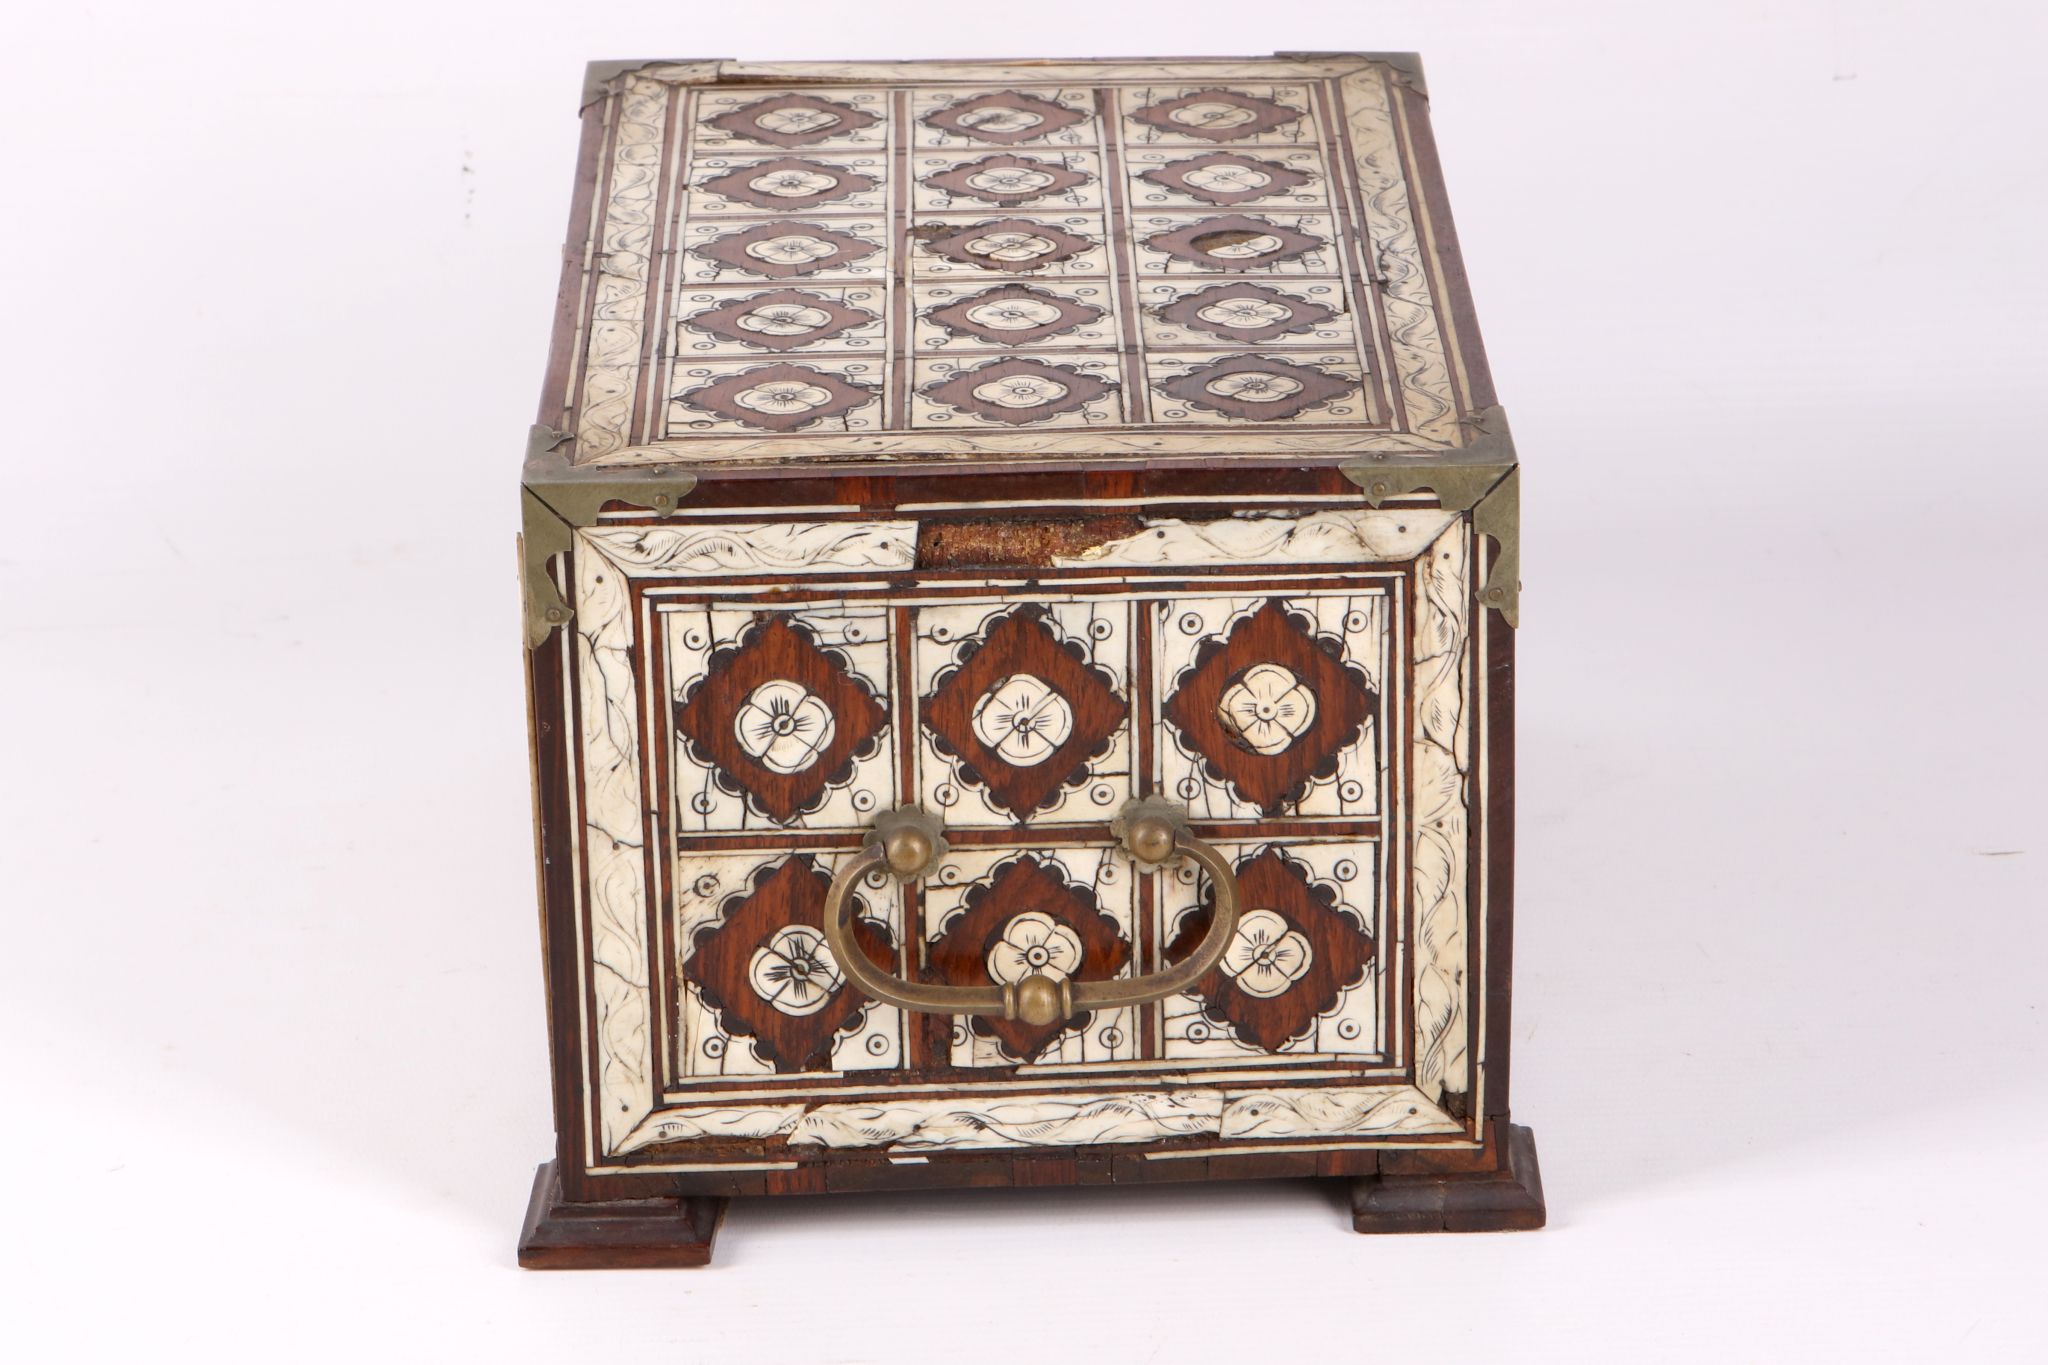 A LATE 17TH / EARLY 18TH CENTURY INDO-PORTUGUESE ROSEWOOD AND IVORY MOUNTED TABLE CABINET of - Image 6 of 6